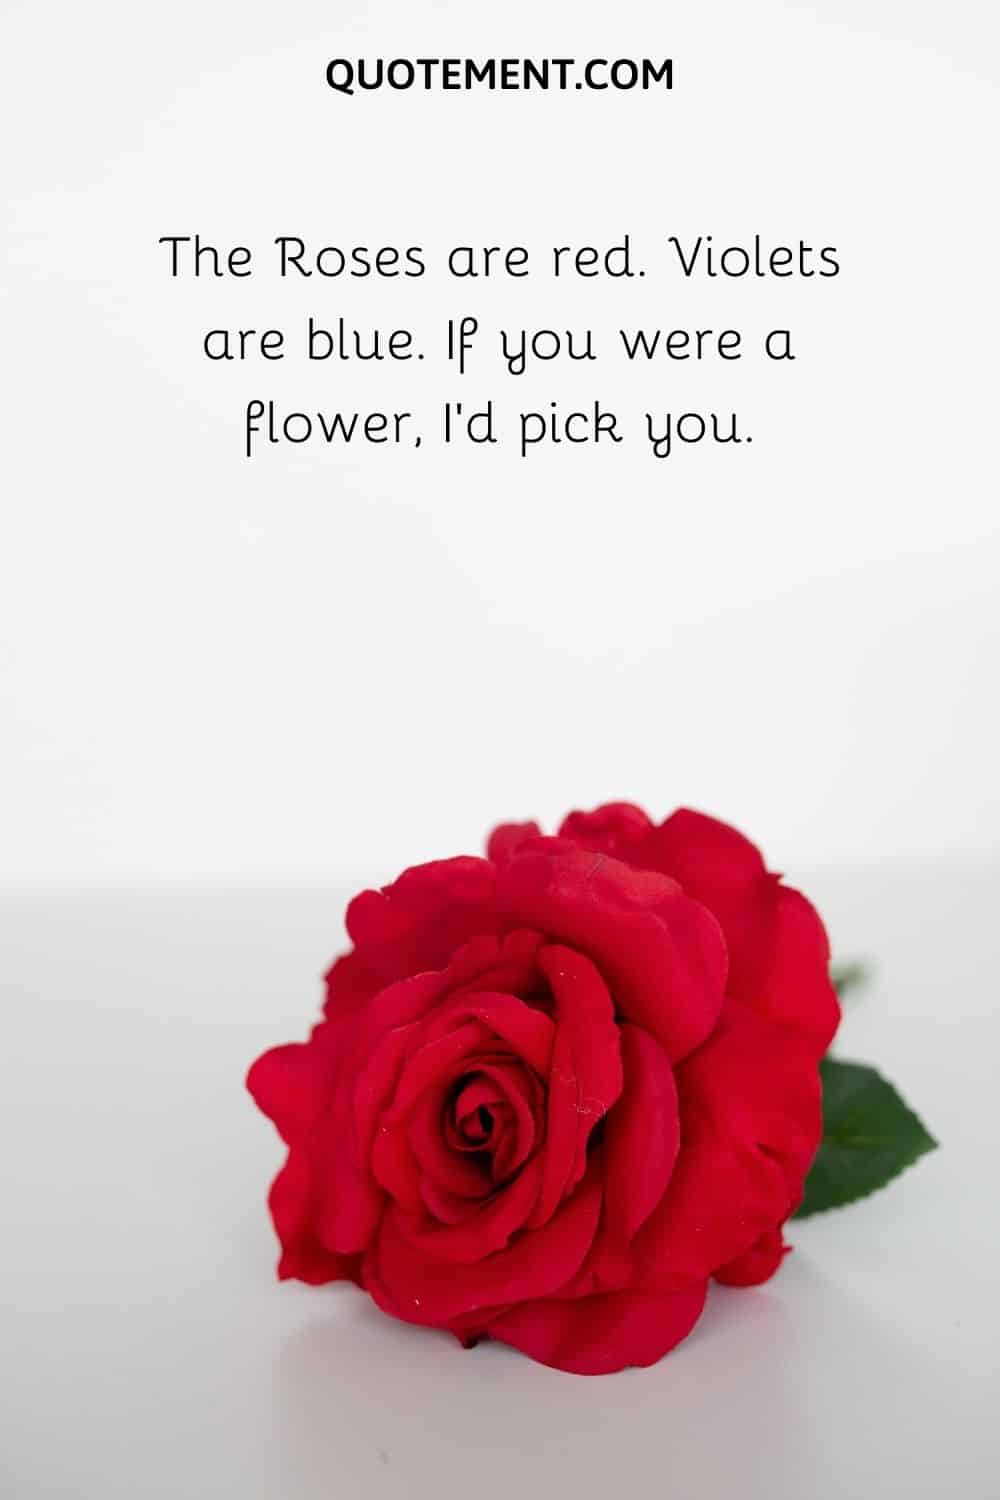 If you were a flower, I’d pick you.